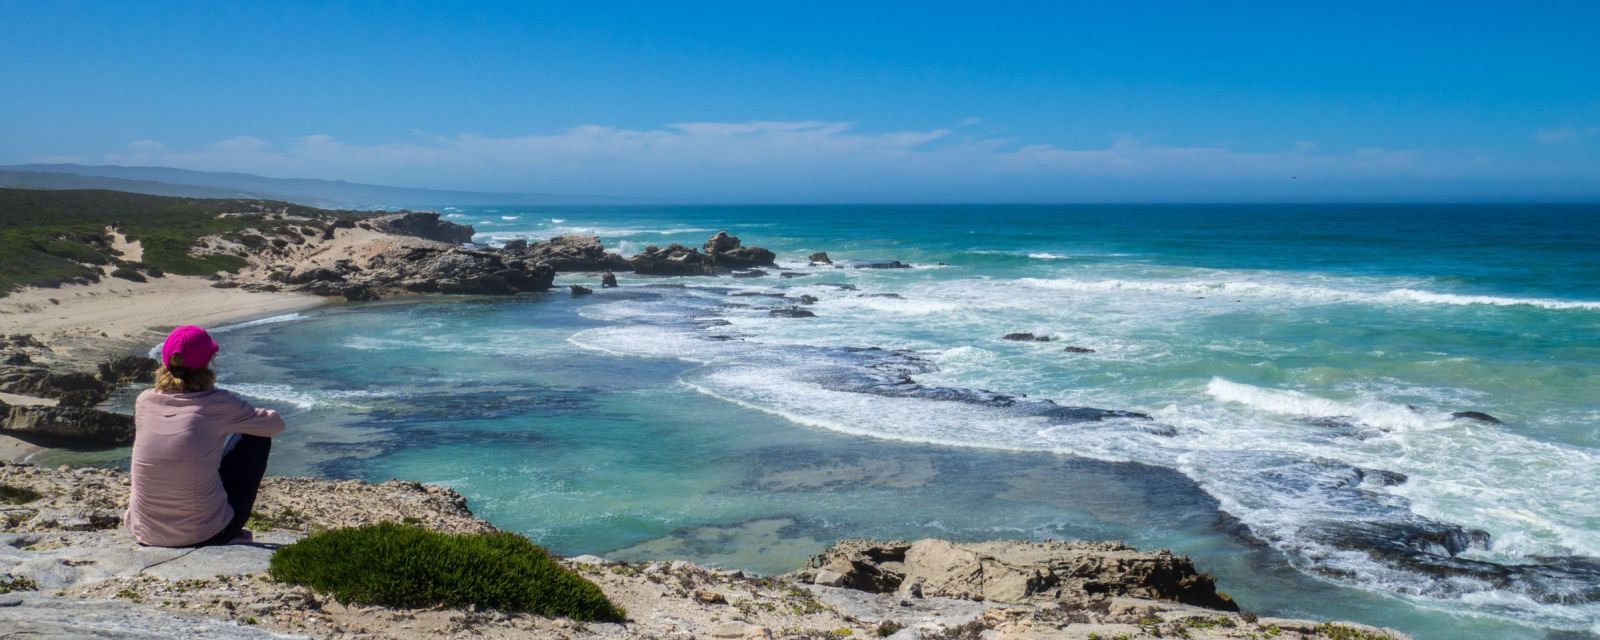 De Hoop - An Important Whale Nursery & the Most Beautiful Reserve on Earth